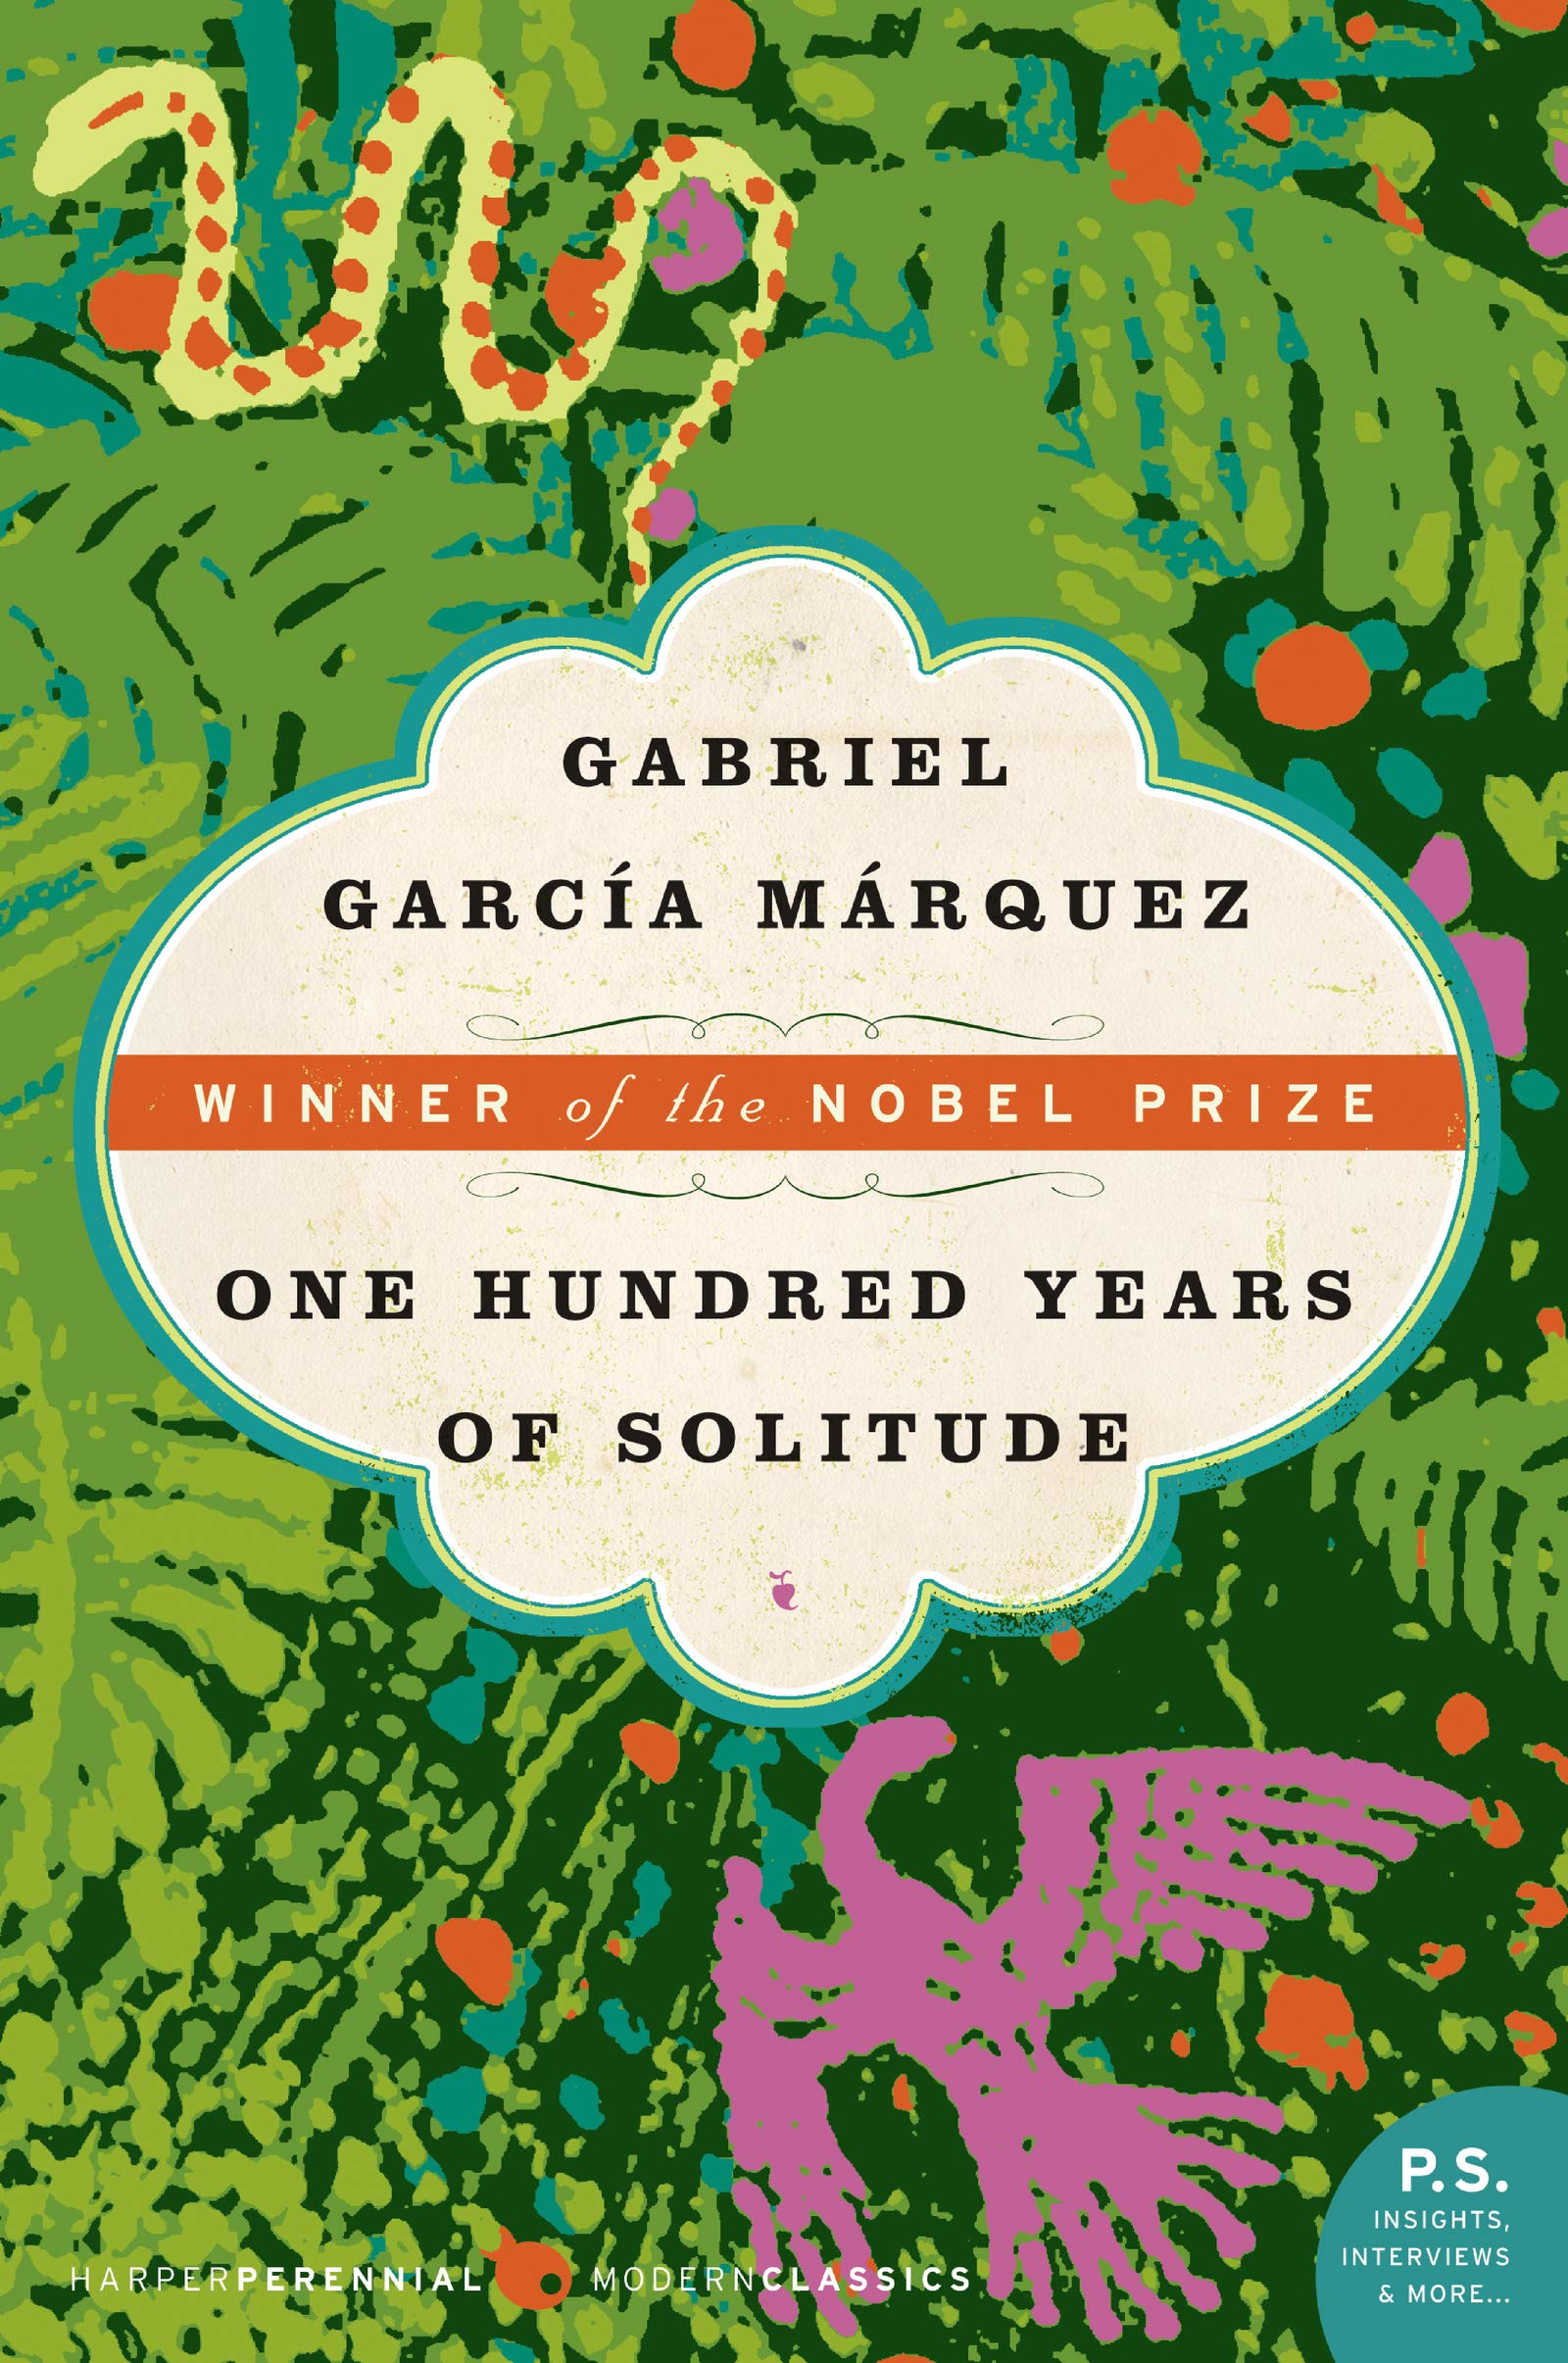 Book cover of 100 Years of Solitude by Gabriel Garcia Marquez.